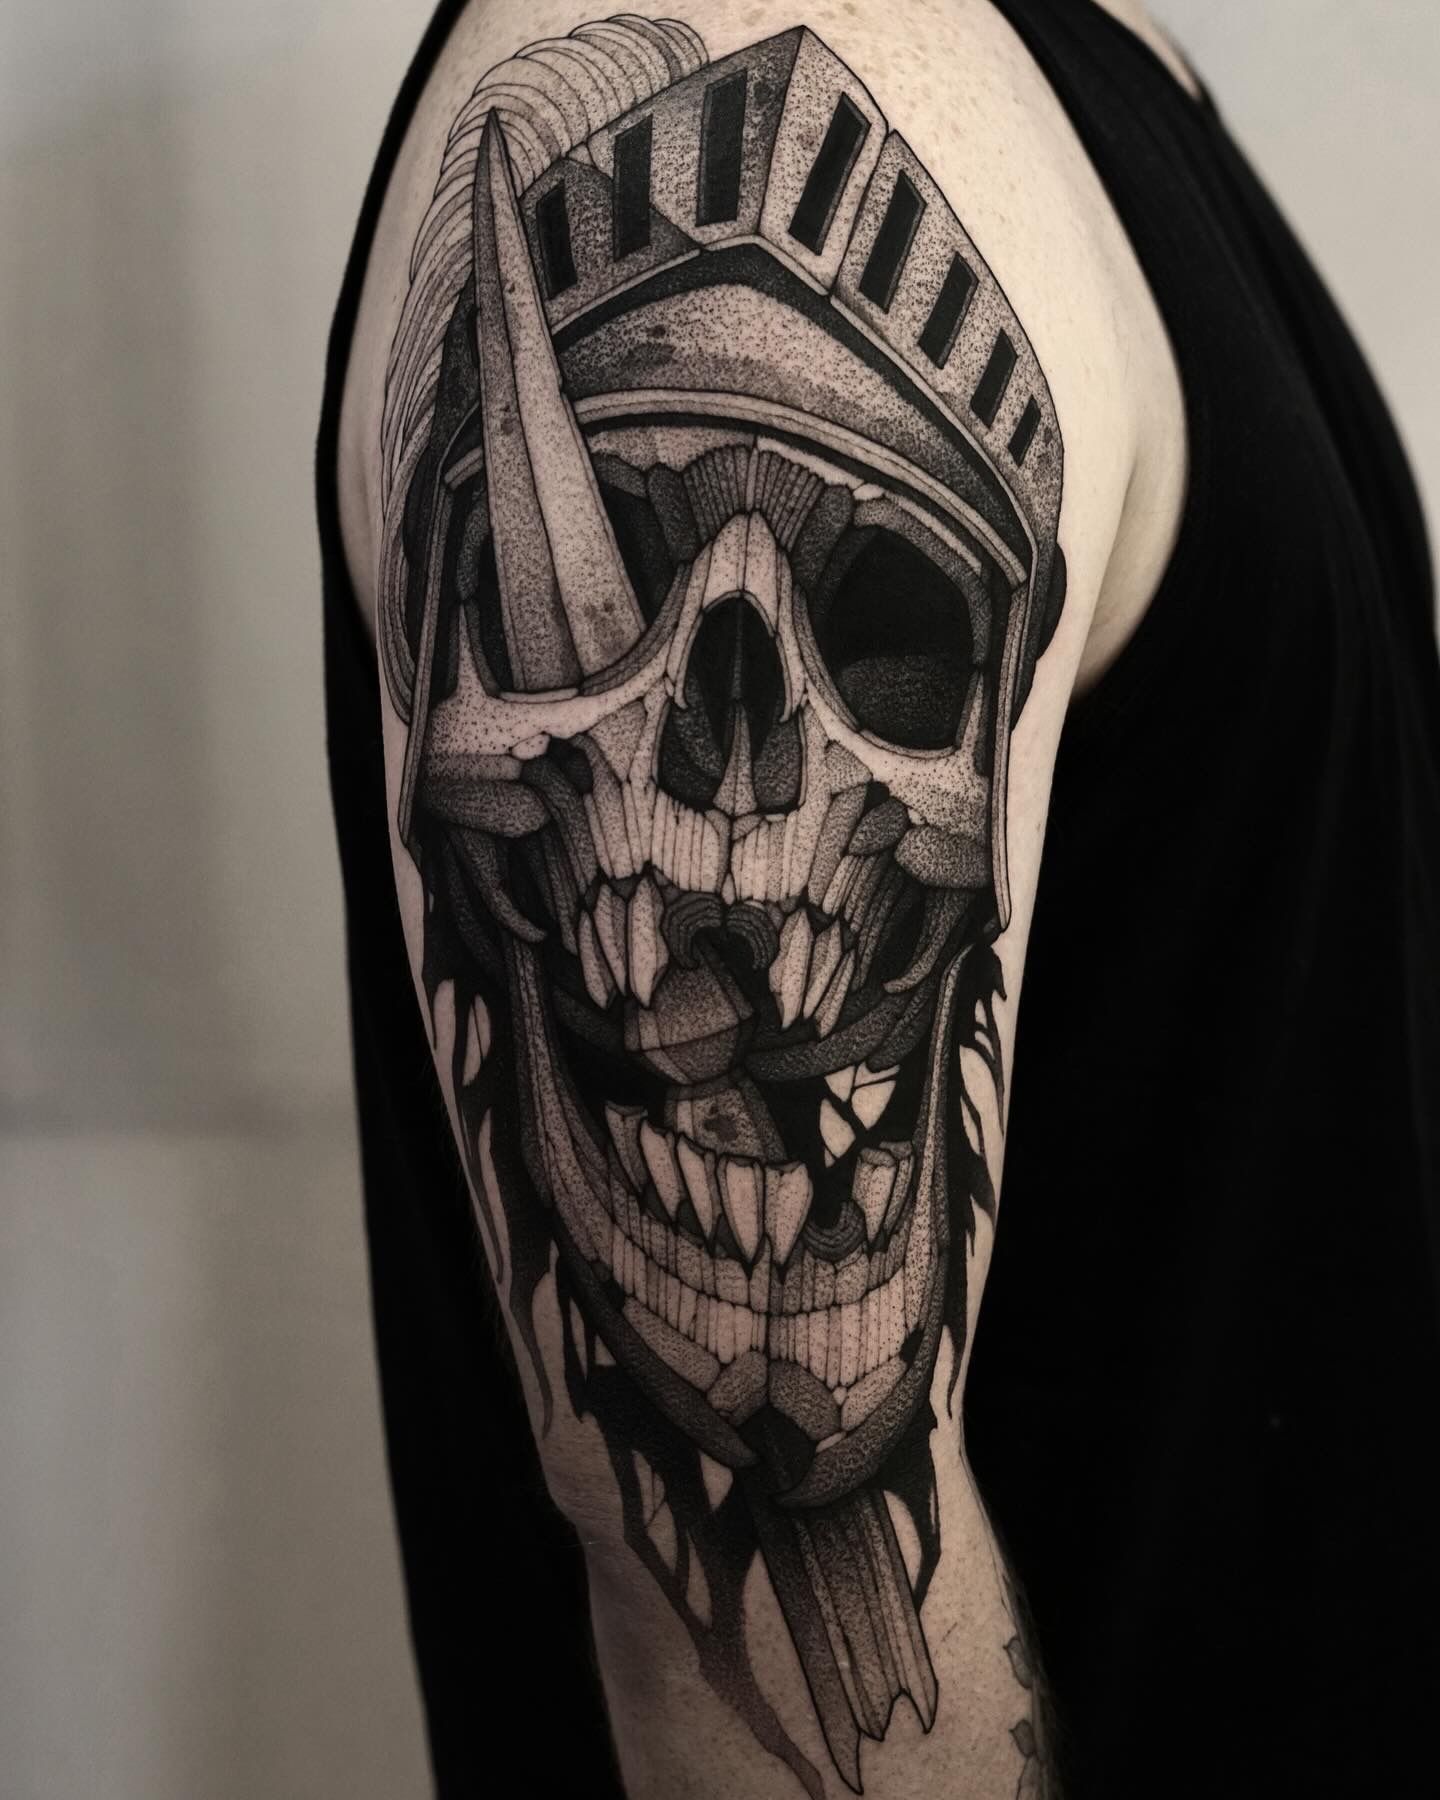 Buy Skull Tattoo Inspiration Book Book Online at Low Prices in India | Skull  Tattoo Inspiration Book Reviews & Ratings - Amazon.in